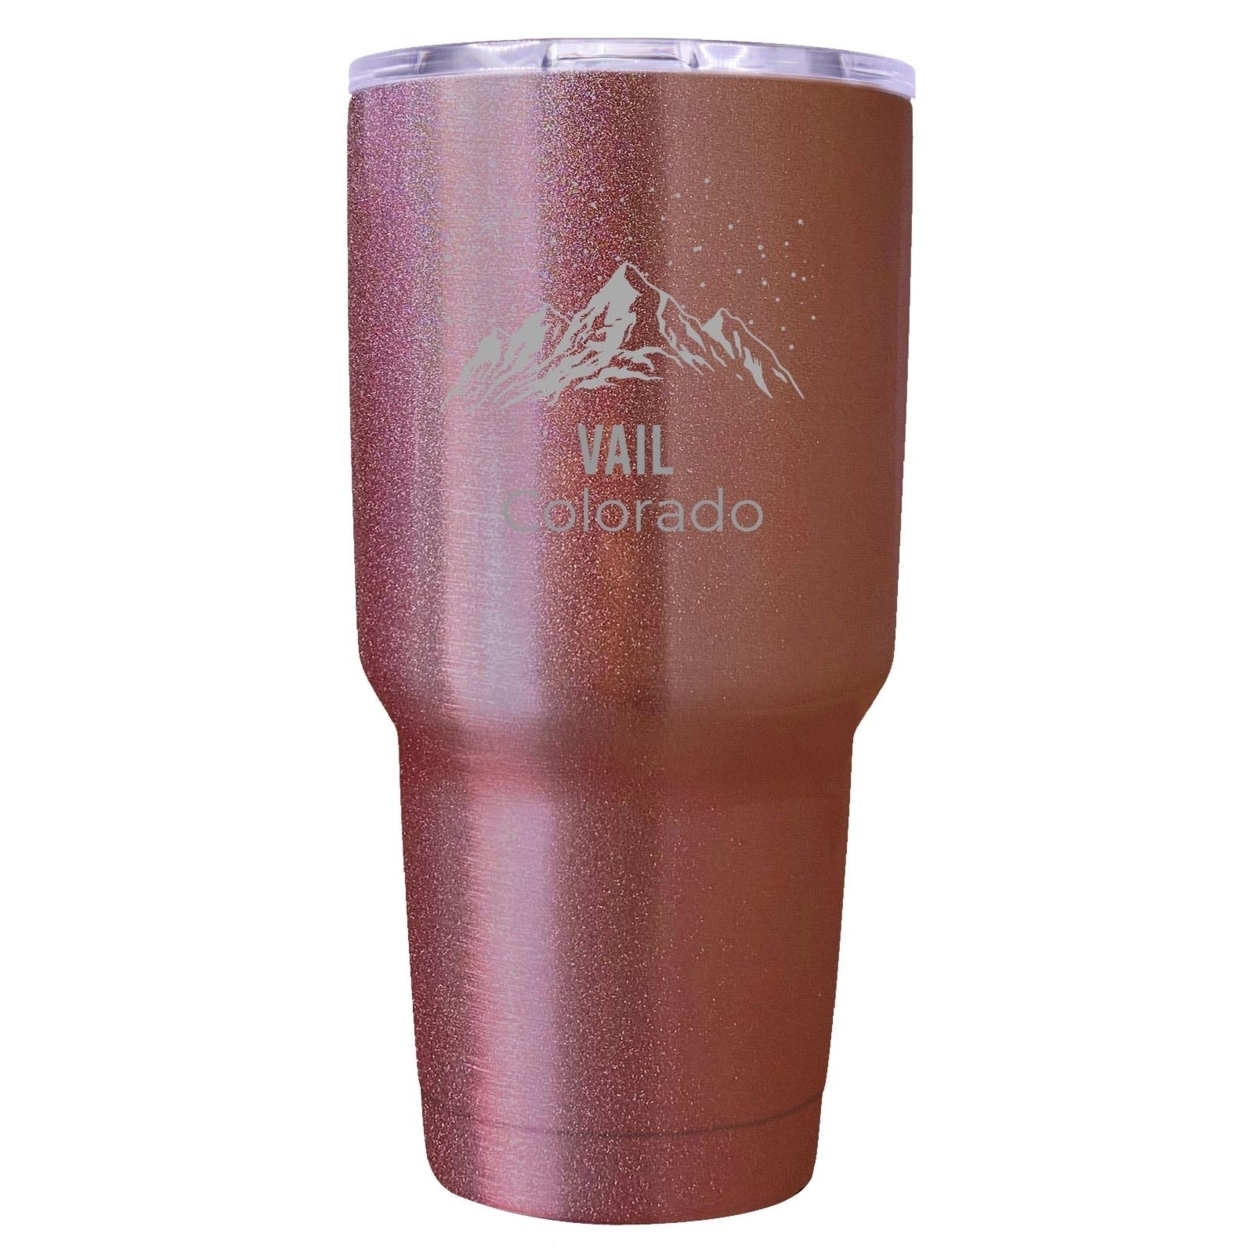 Vail Colorado Ski Snowboard Winter Souvenir Laser Engraved 24 Oz Insulated Stainless Steel Tumbler - Rose Gold